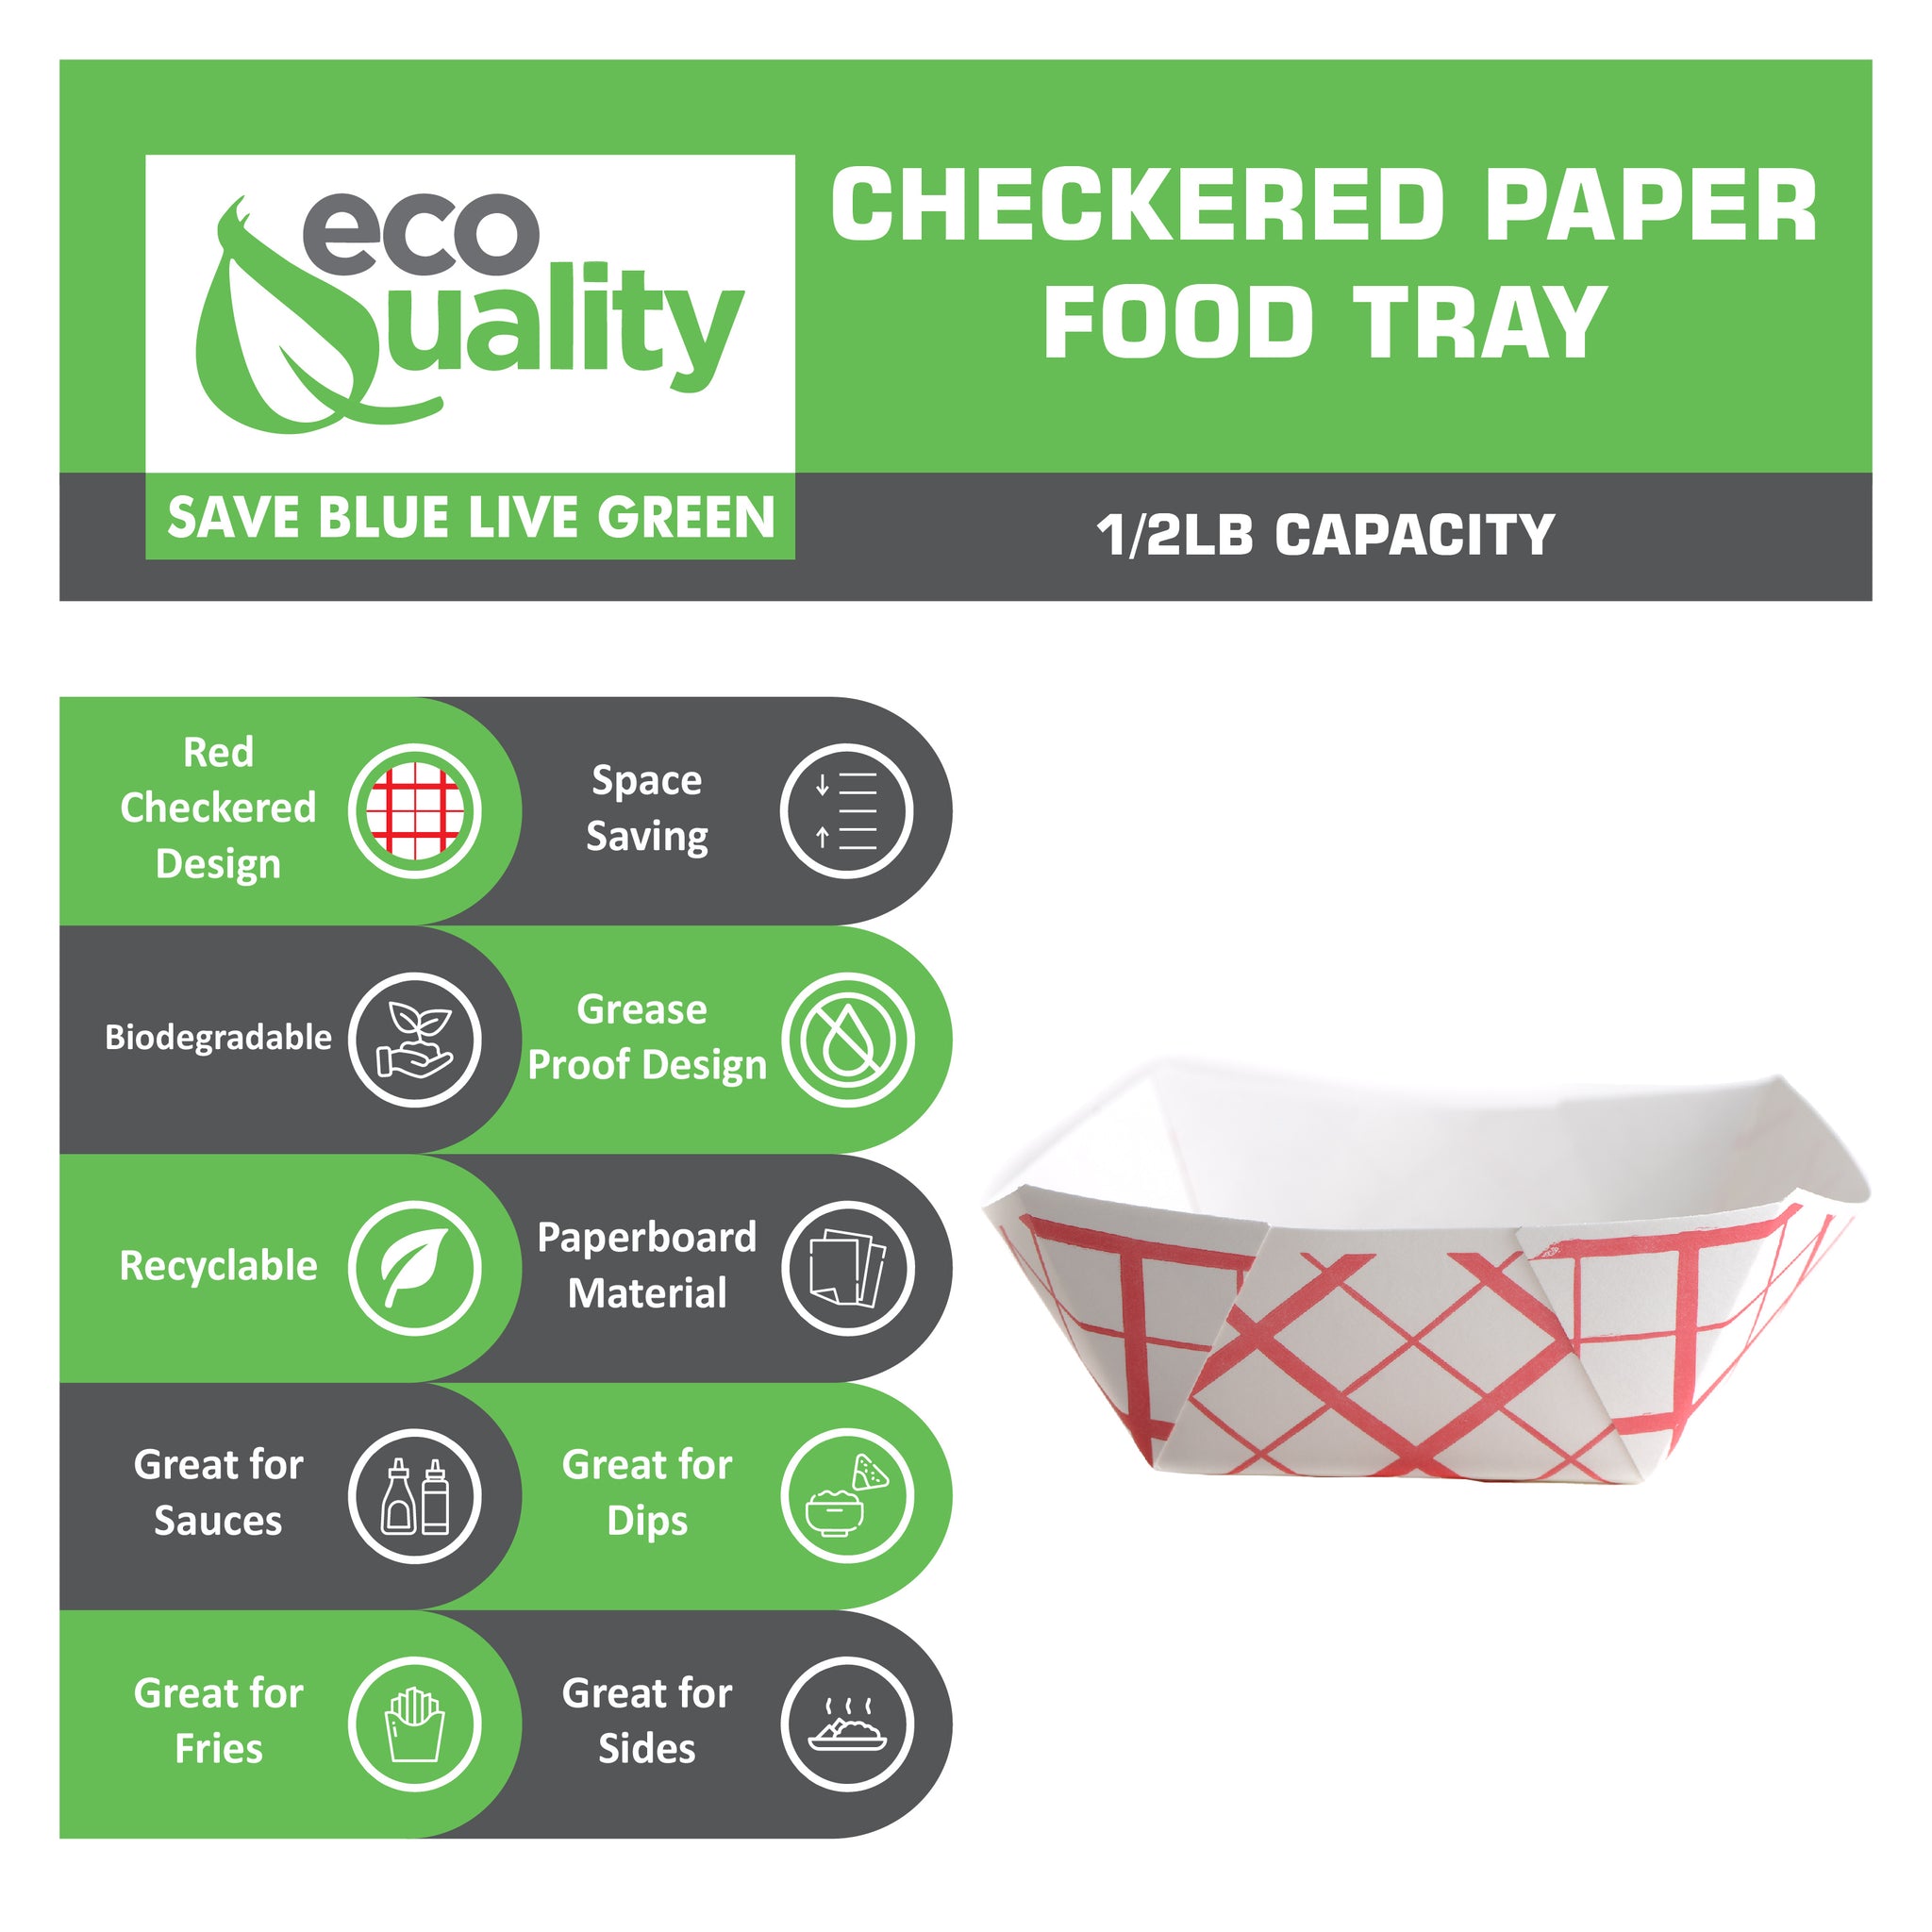 1/2lb Disposable Checkered Paper Food Tray